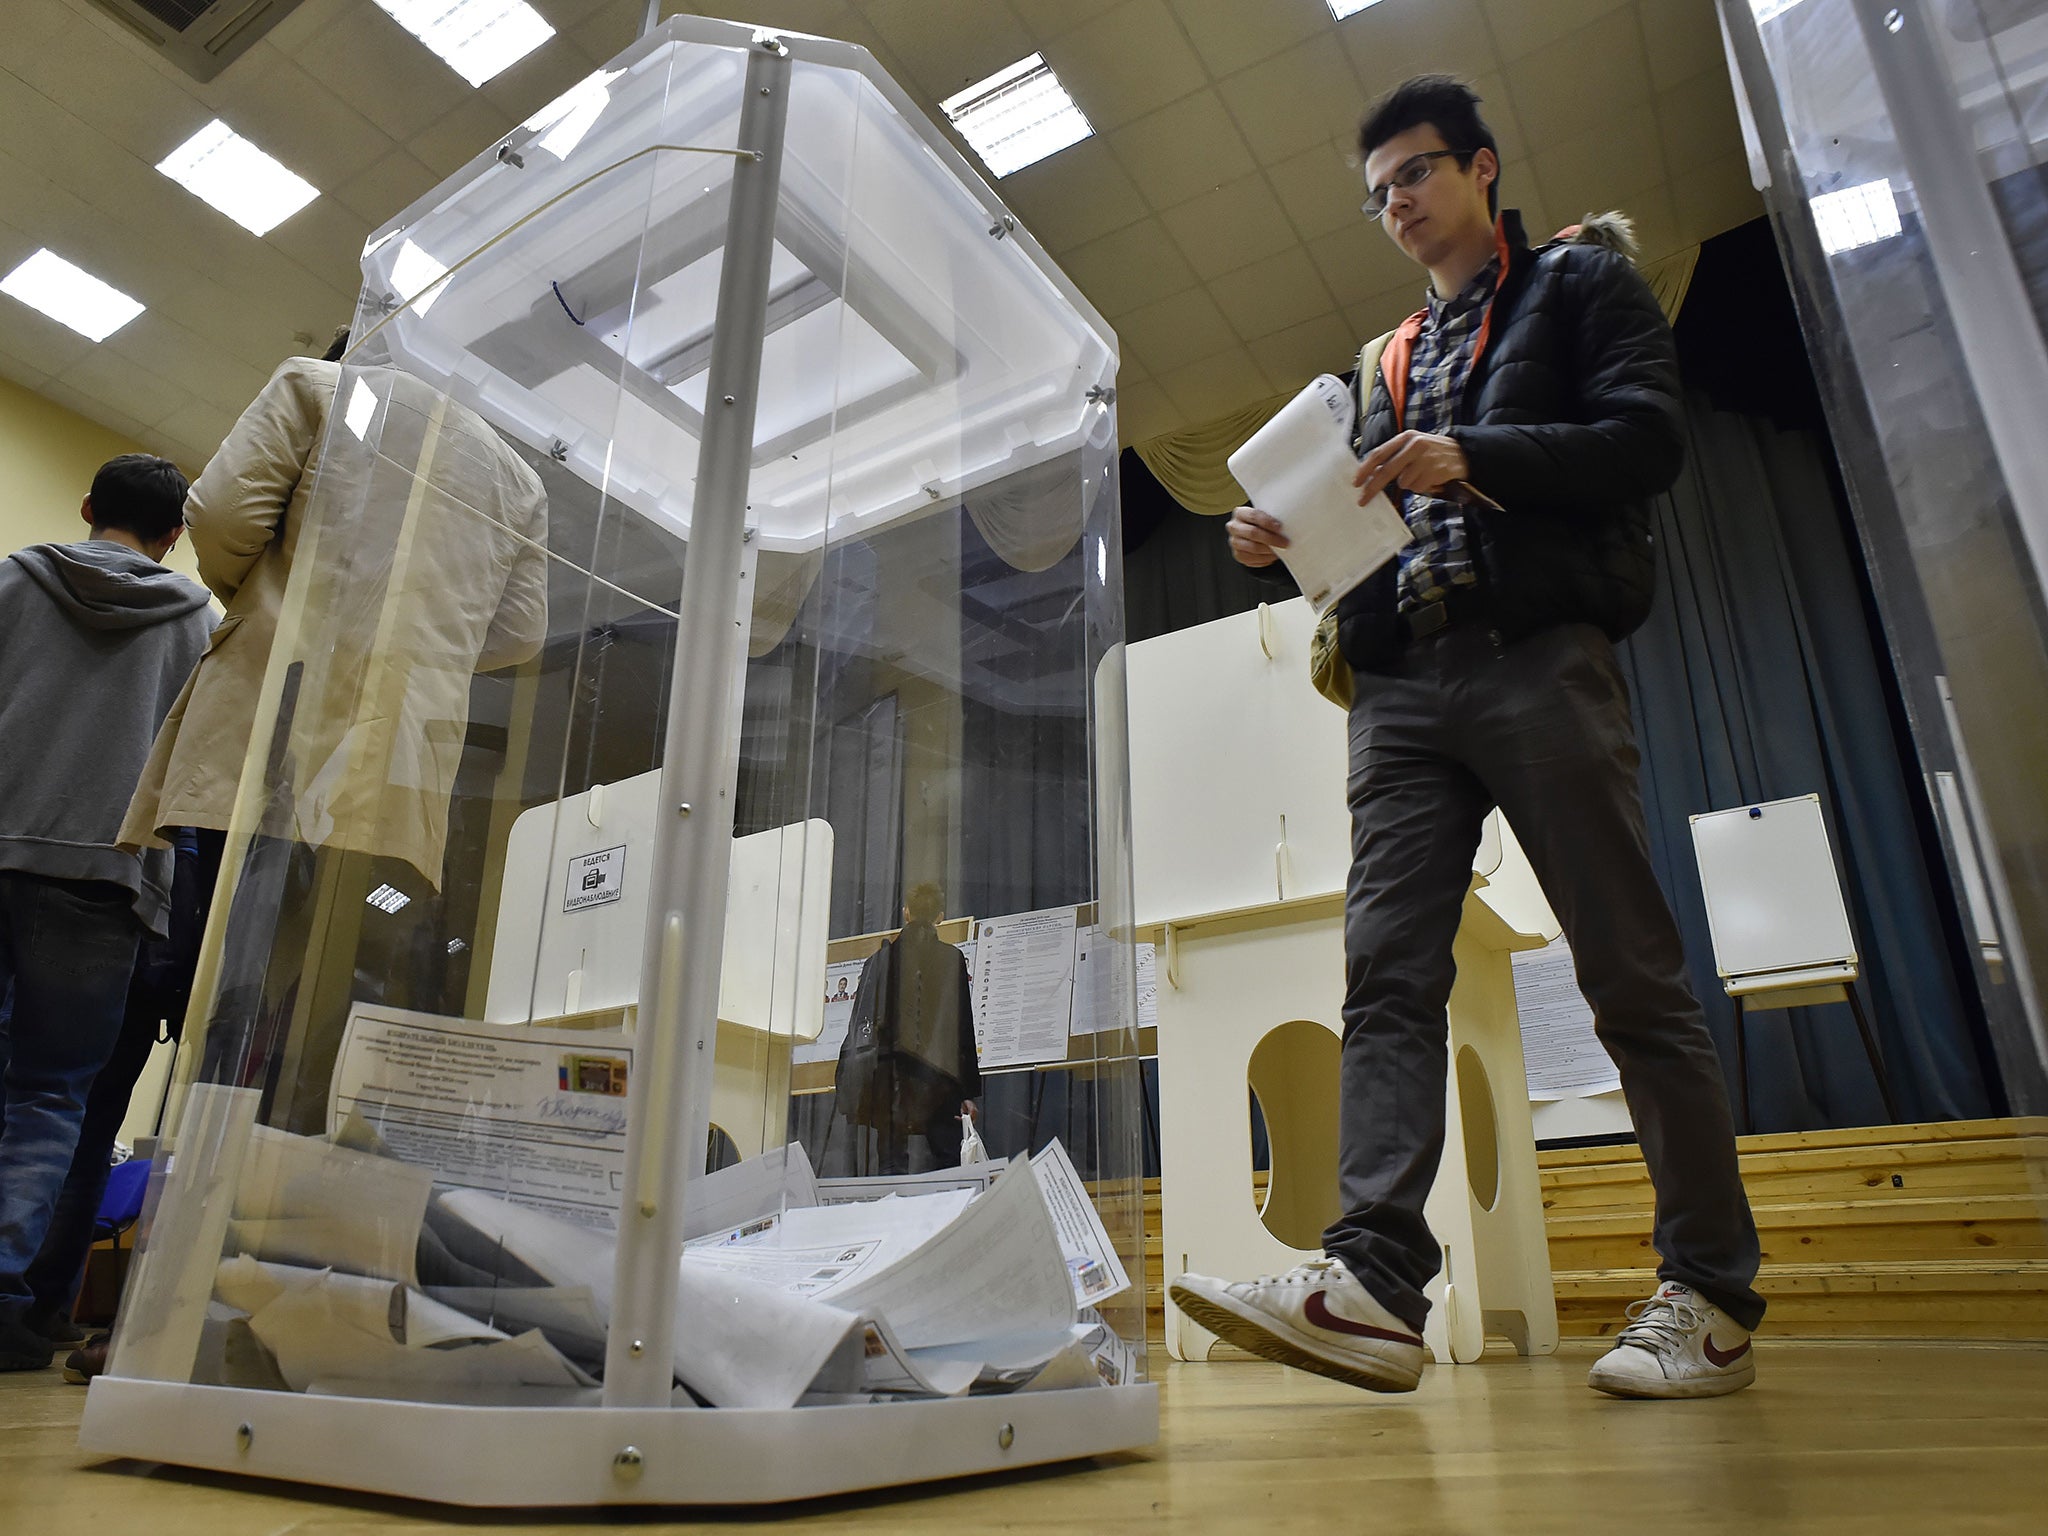 Voters casting their ballots at polling stations in Moscow. There has been widespread allegations of electoral fraud